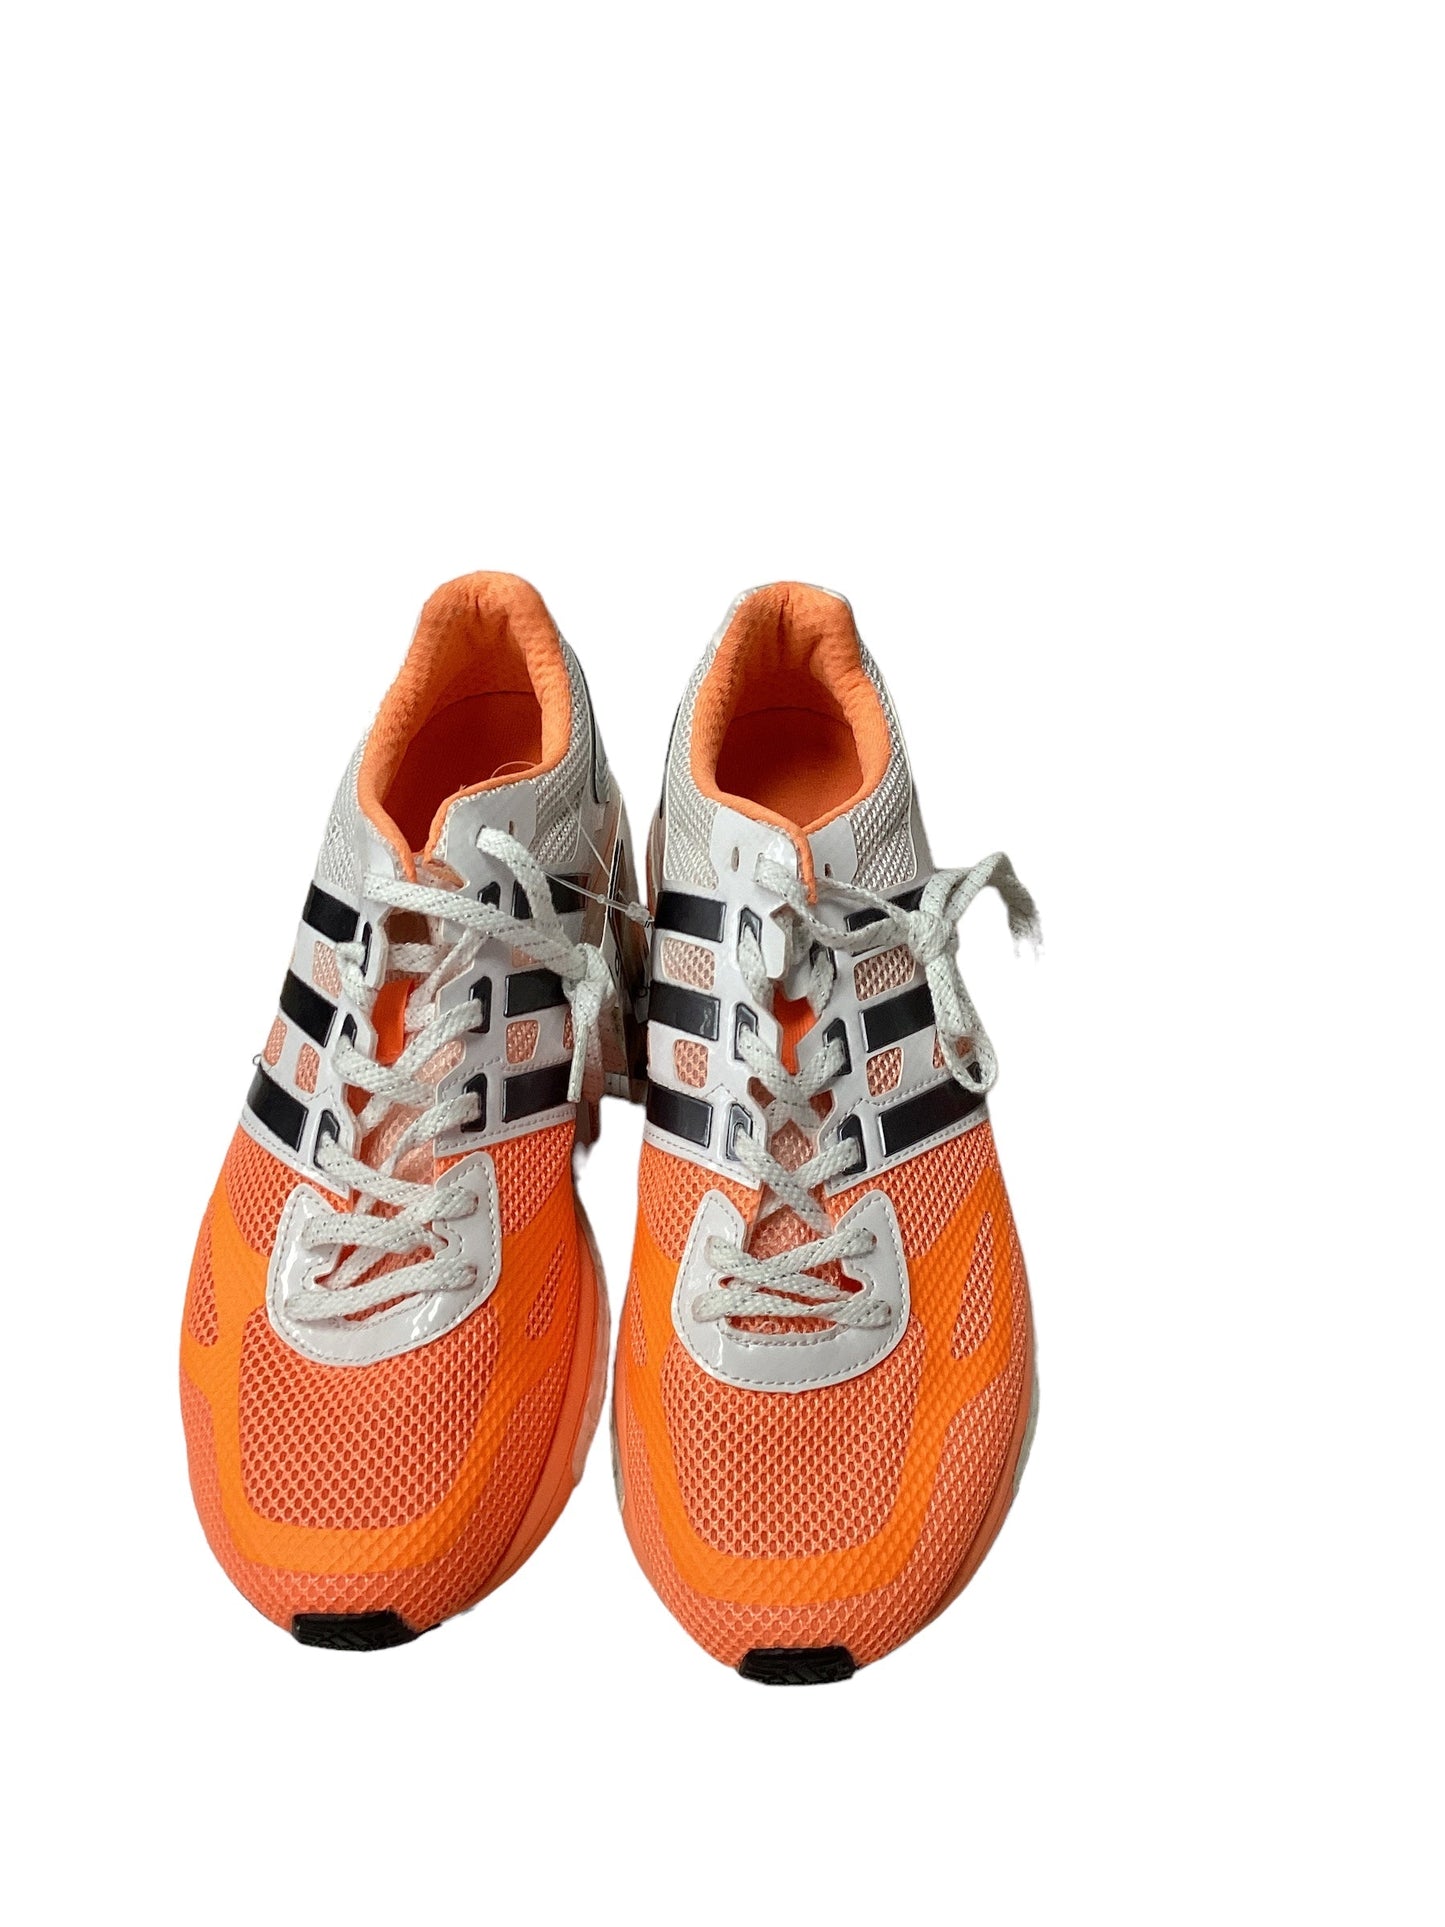 Orange Shoes Sneakers Adidas, Size 9.5